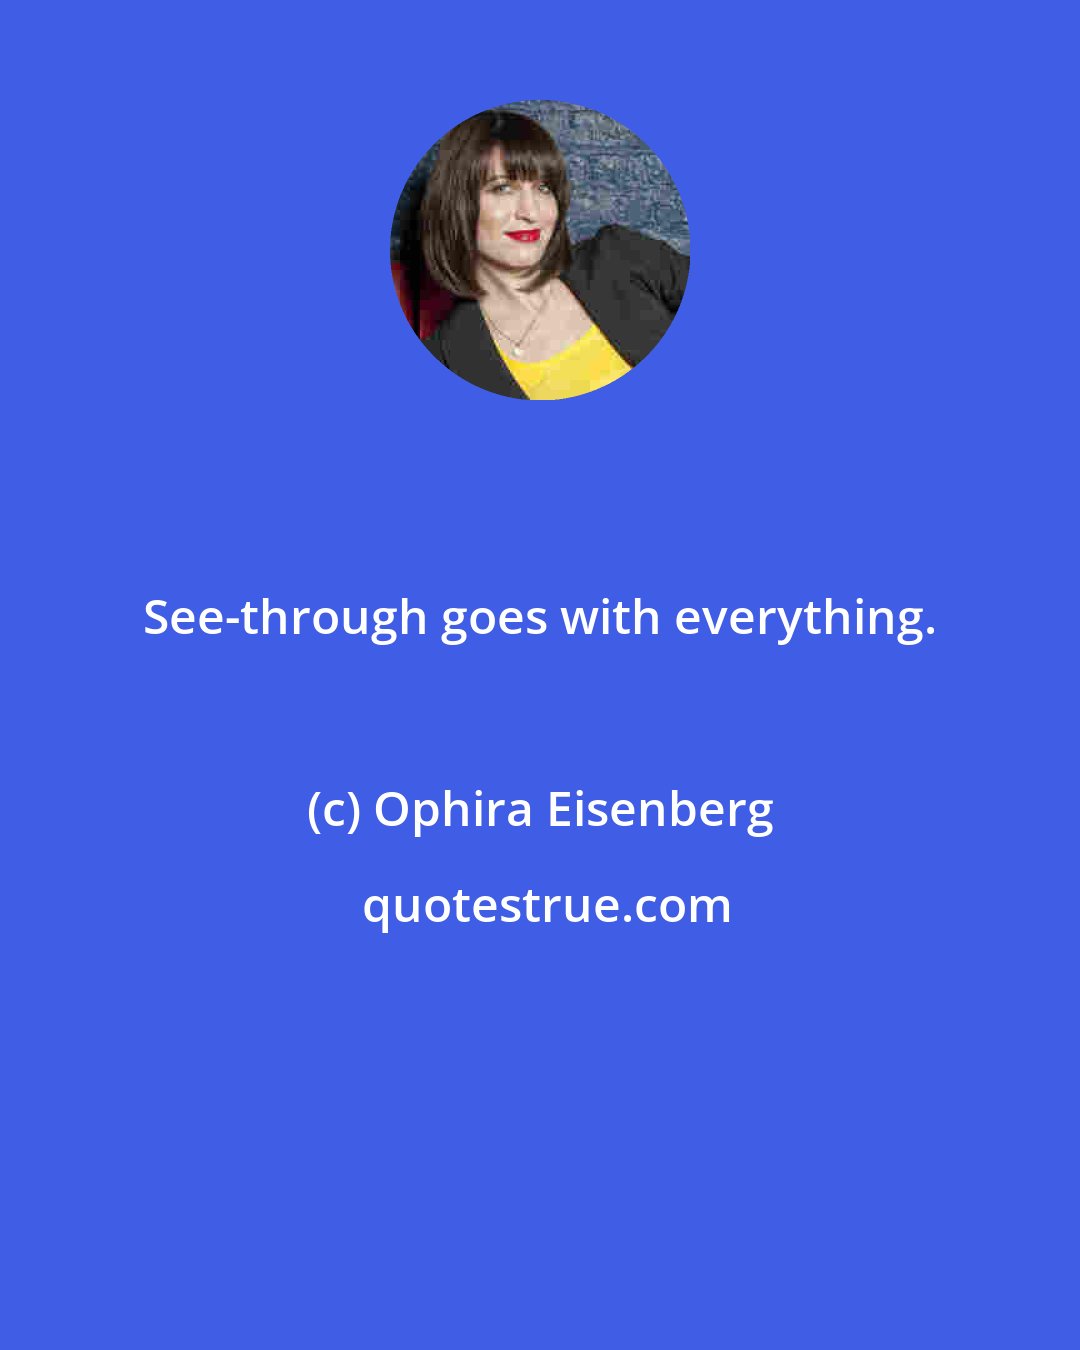 Ophira Eisenberg: See-through goes with everything.